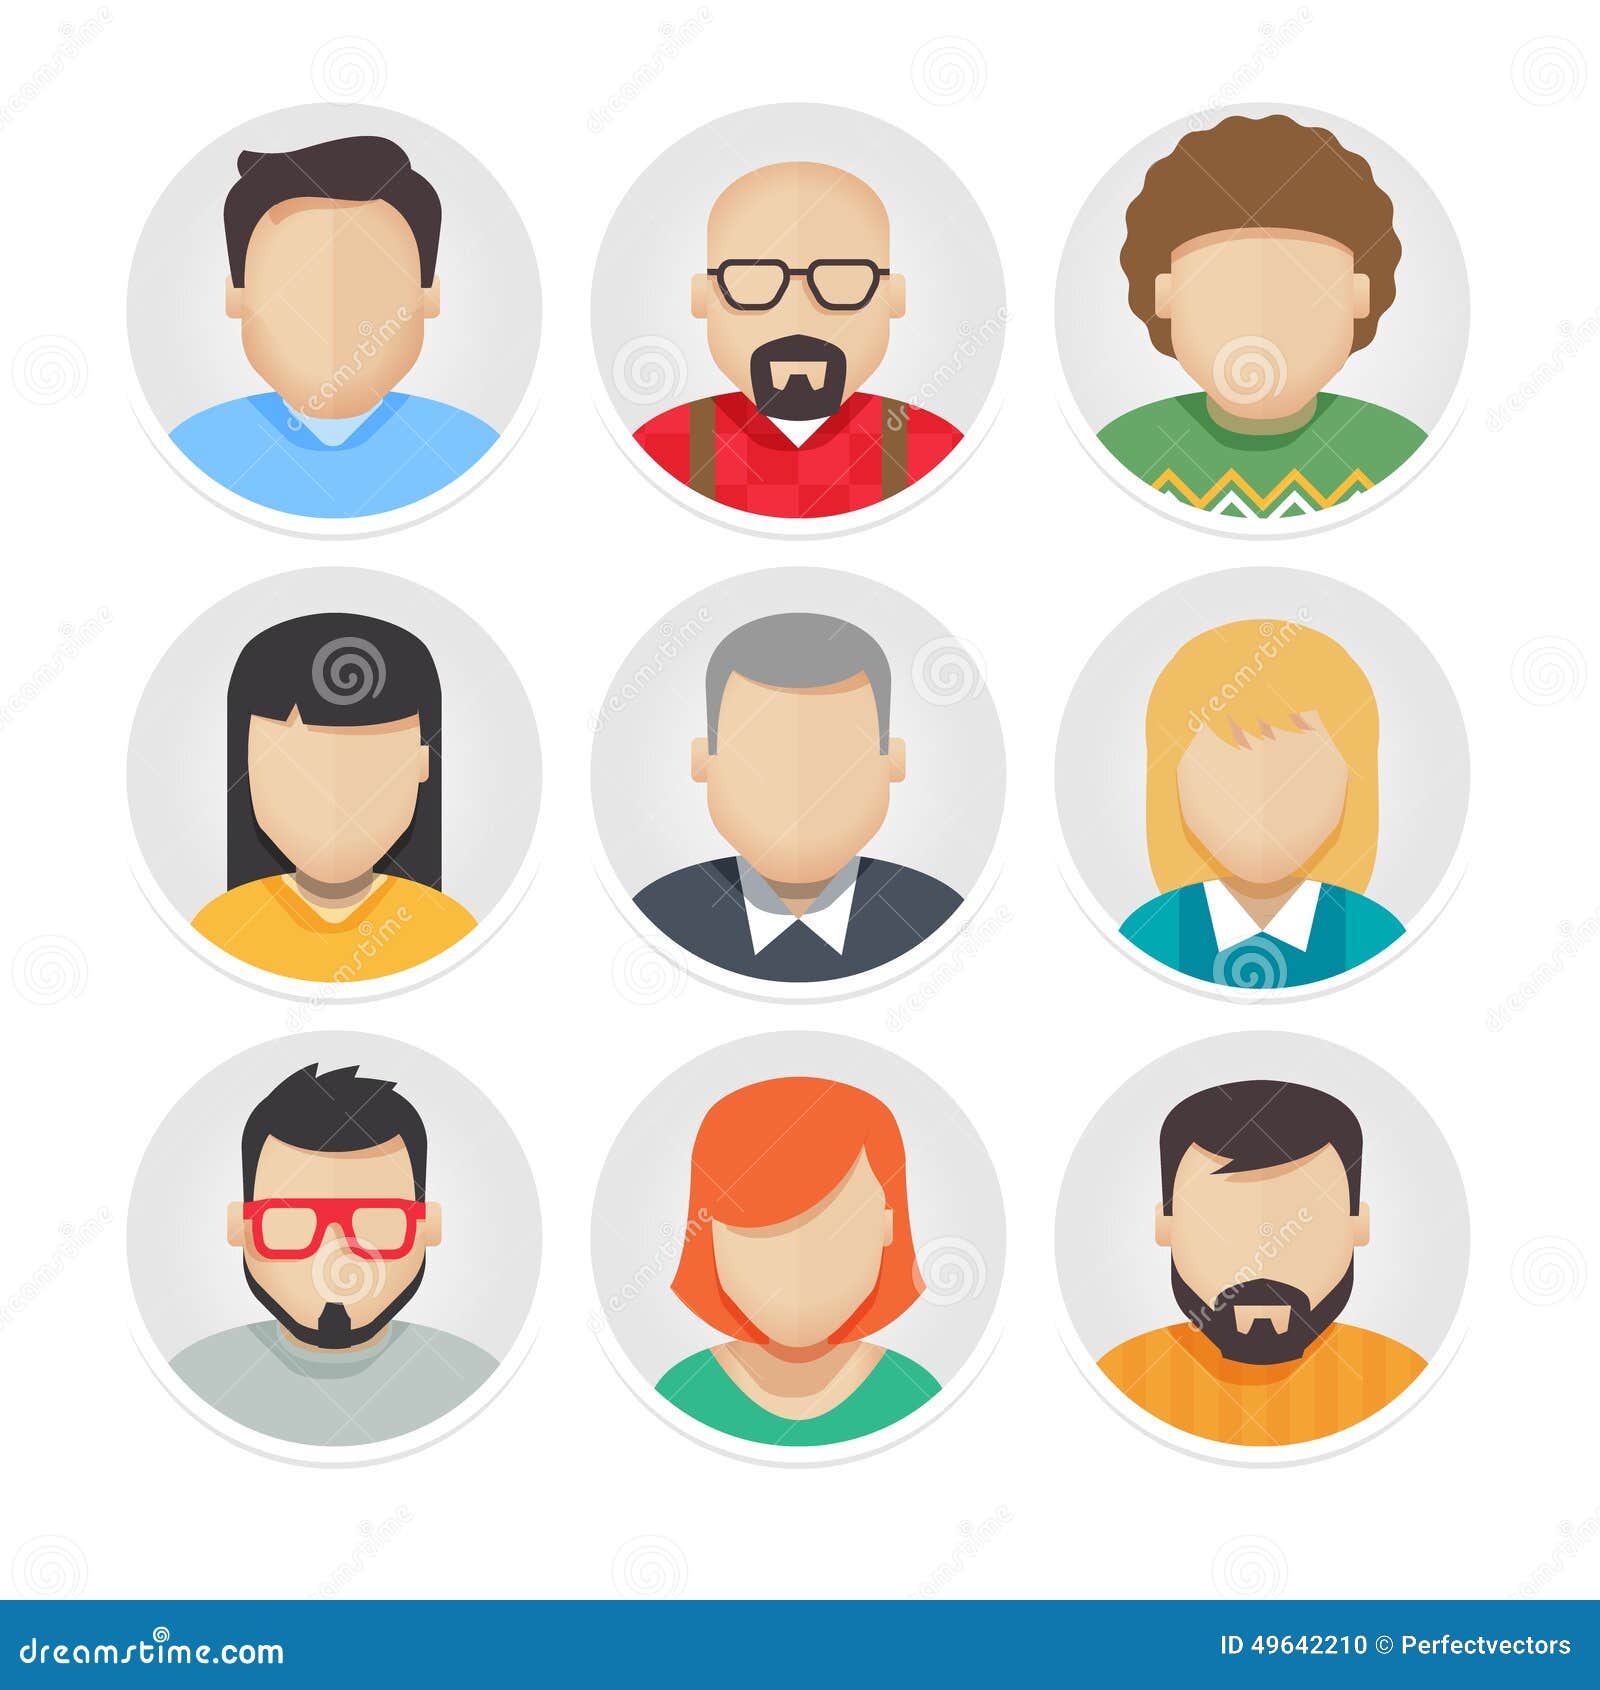 Avatar Set Clipart Vector, Set Of Avatar Person Icon In Flat Design  Illustration, Person Icons, Avatar Icons, In Icons PNG Image For Free  Download